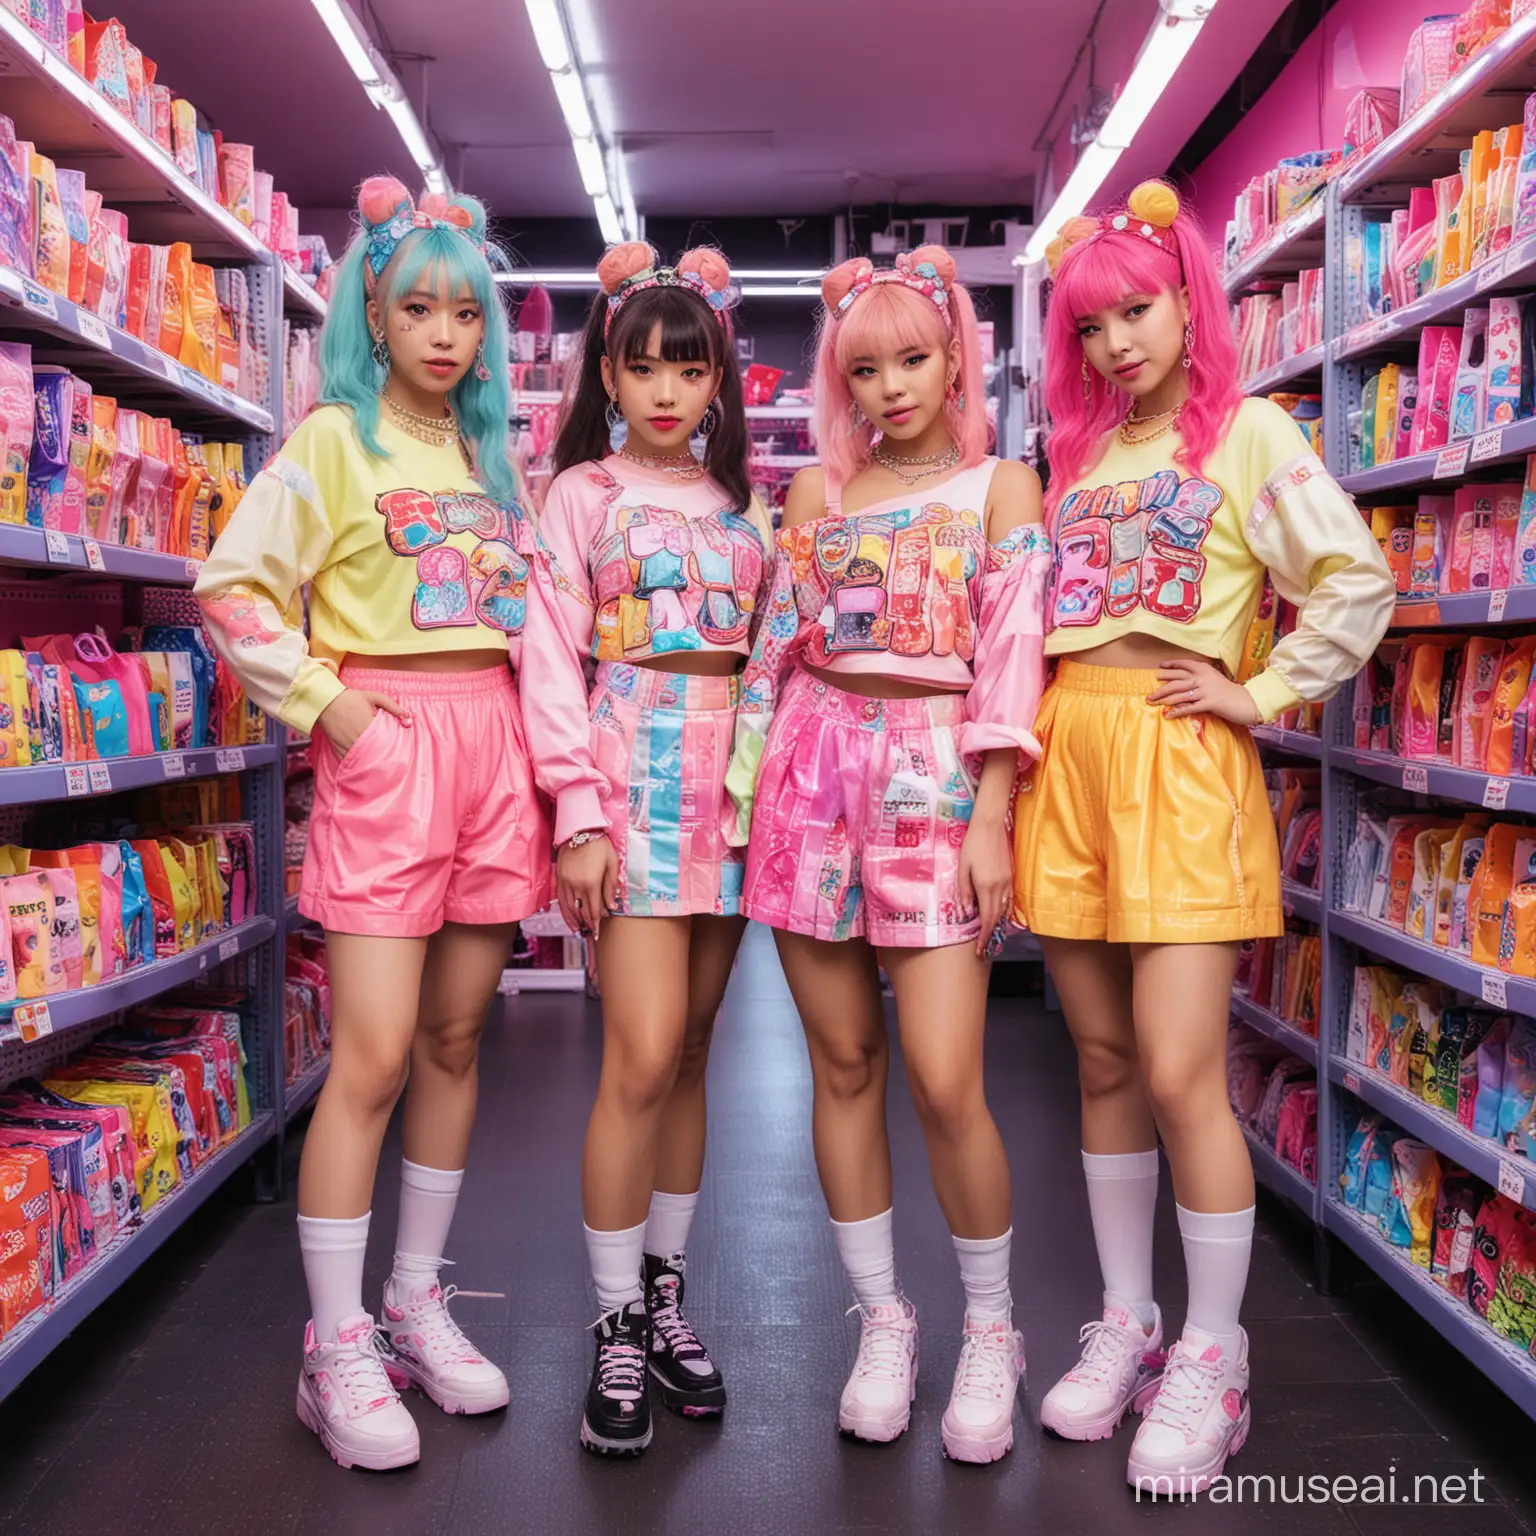 3 girls of differing races dressed in harajuku decora fashion style posing in front of racks of colorful neon clothing